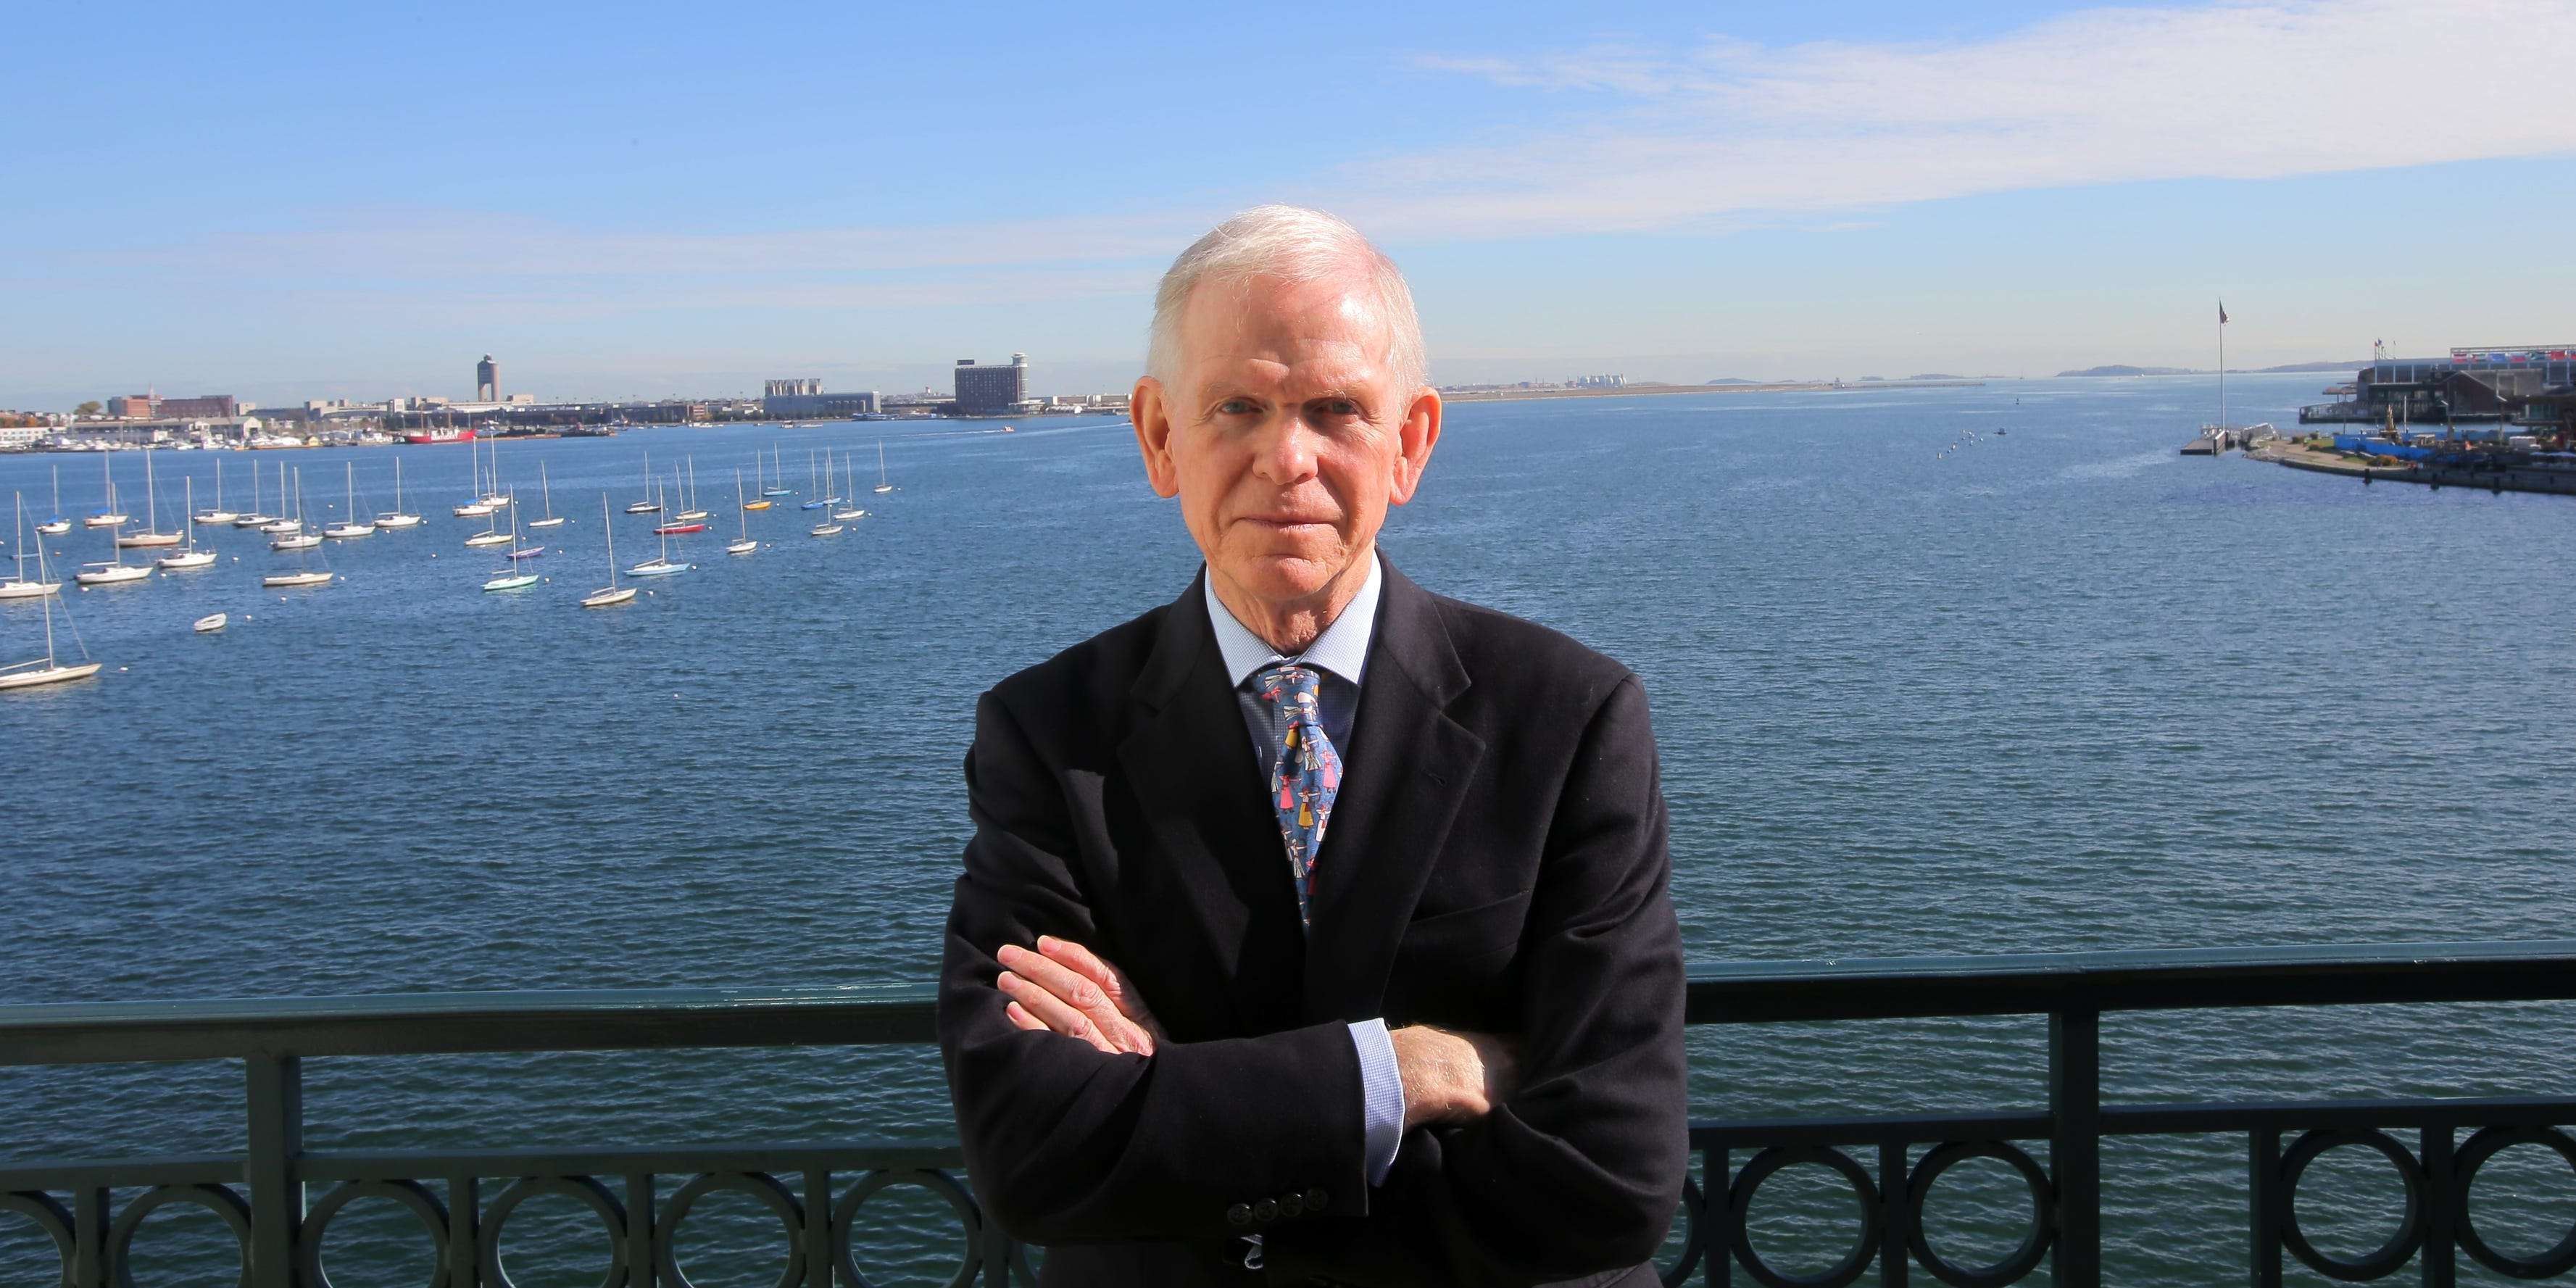 Legendary investor Jeremy Grantham sees a housing bubble in almost